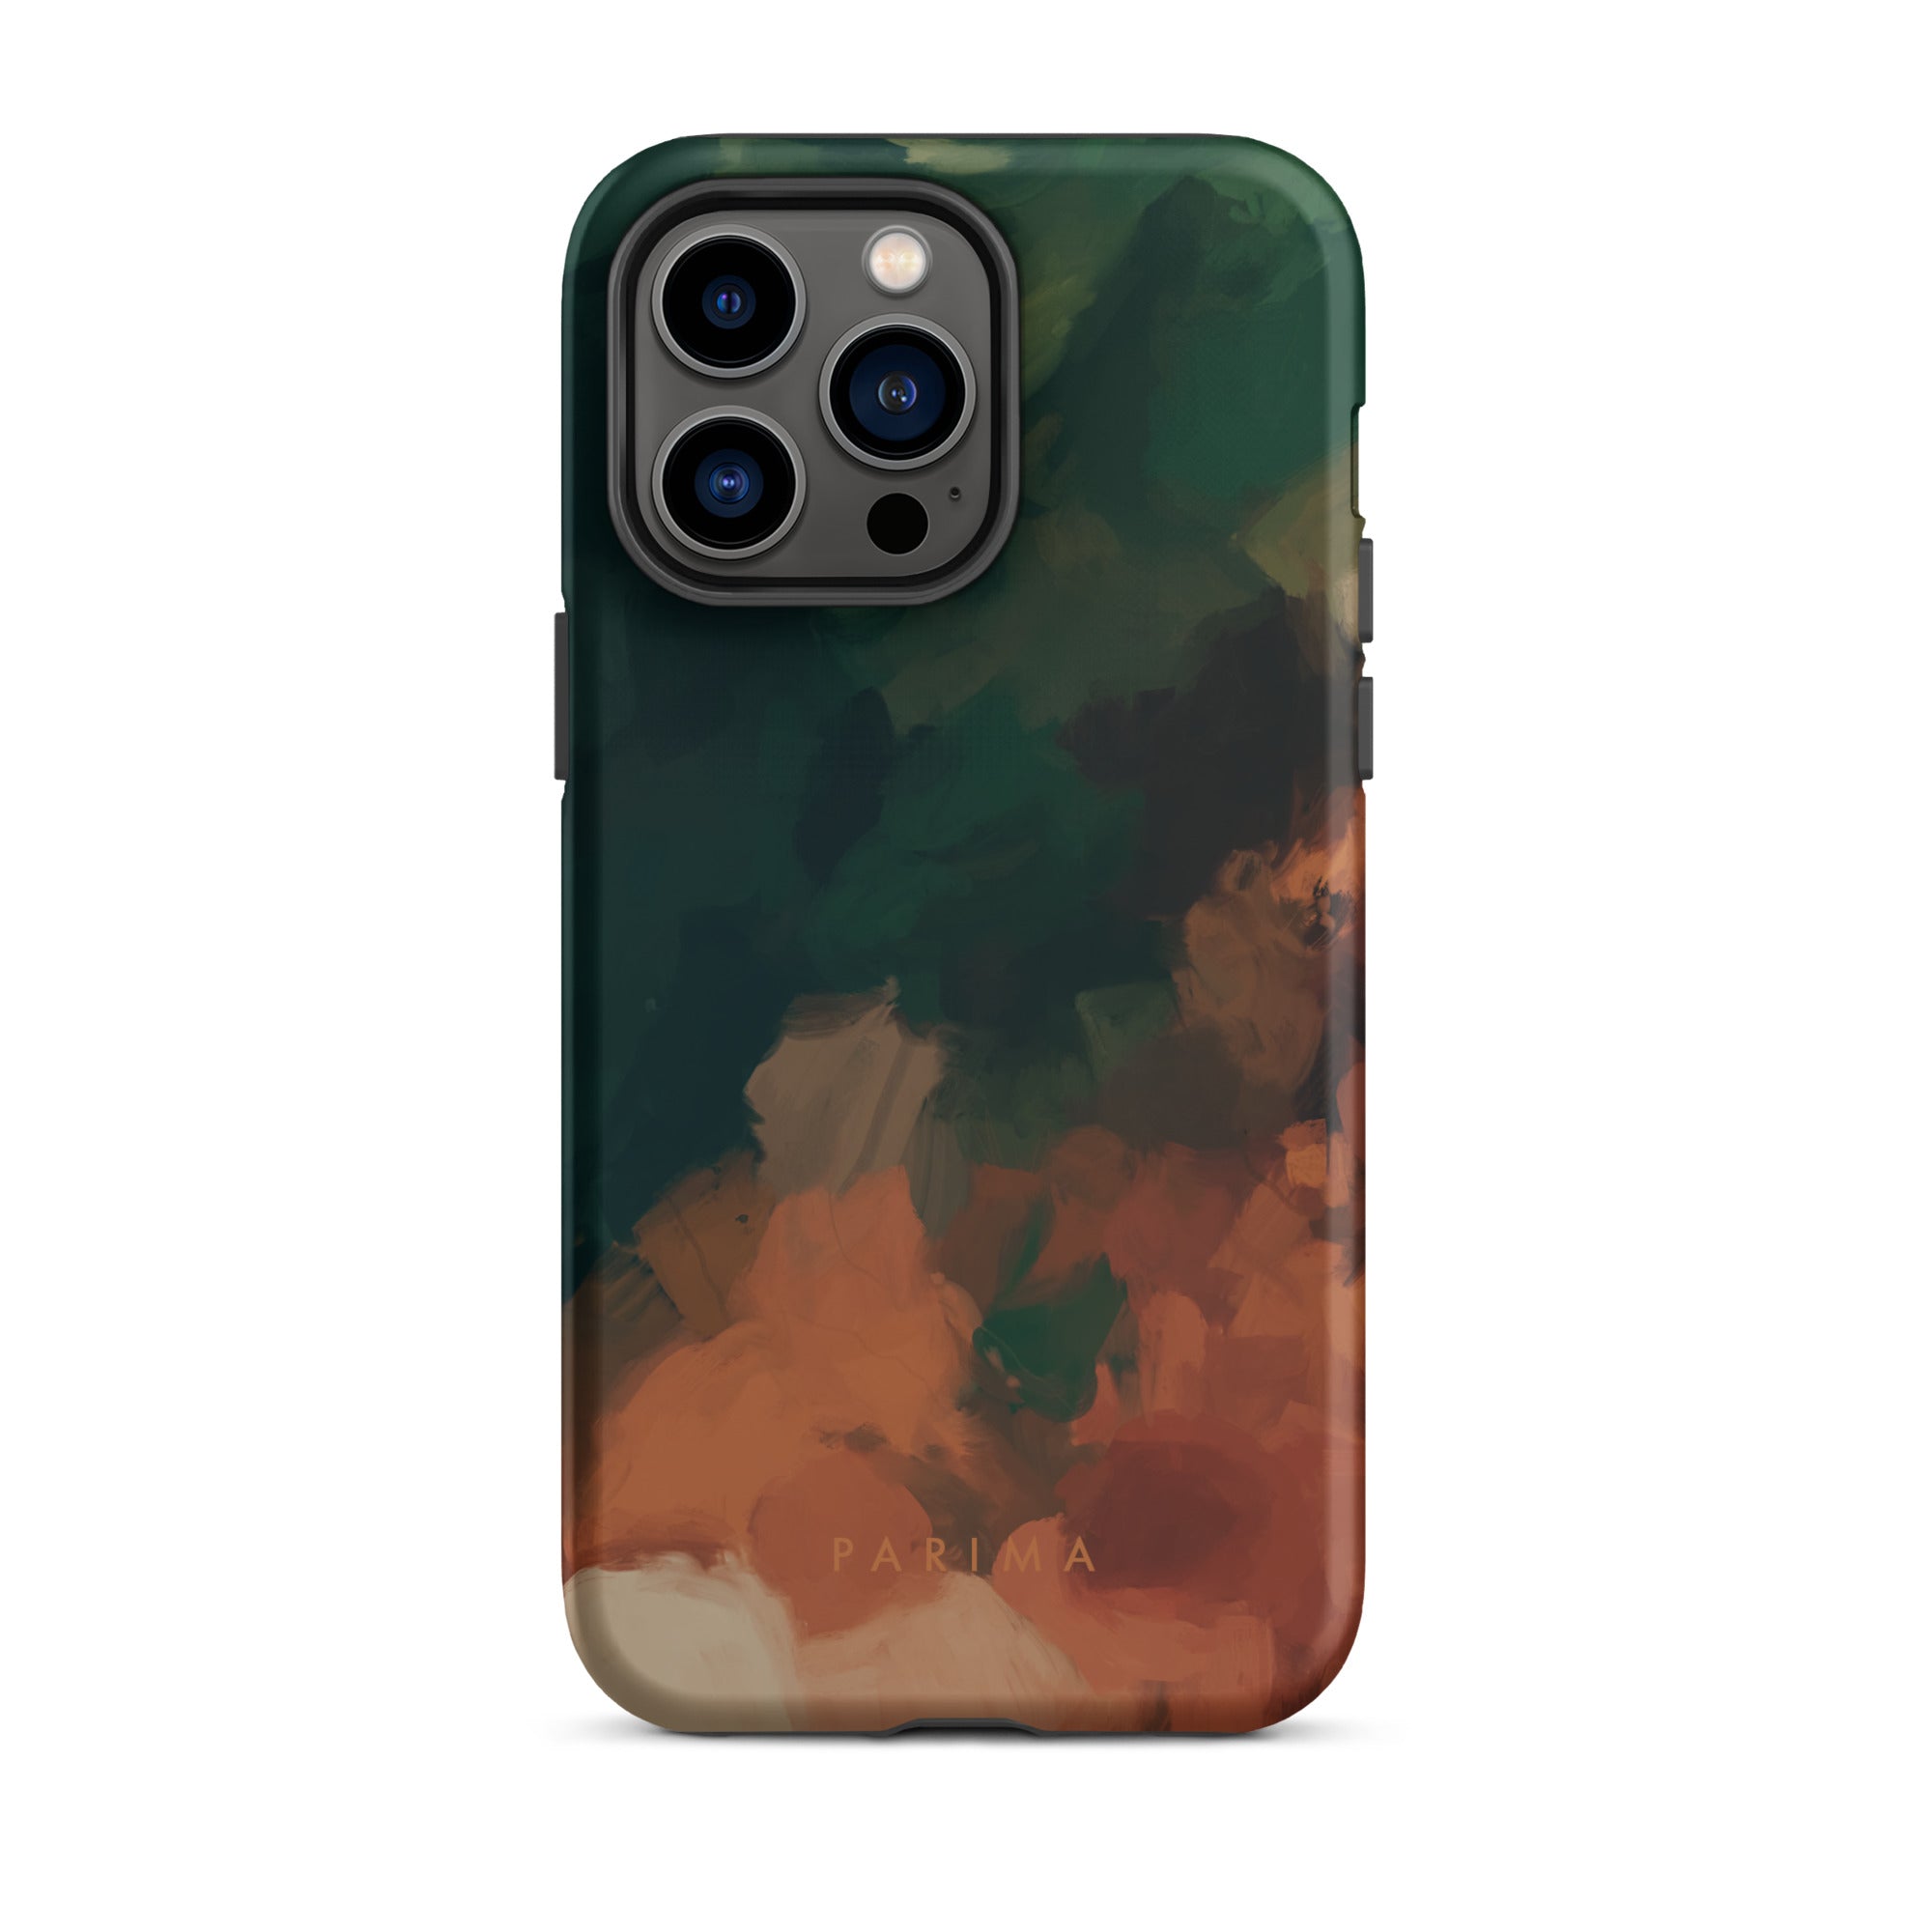 Cedar, green and brown abstract art - iPhone 14 Pro Max tough case by Parima Studio